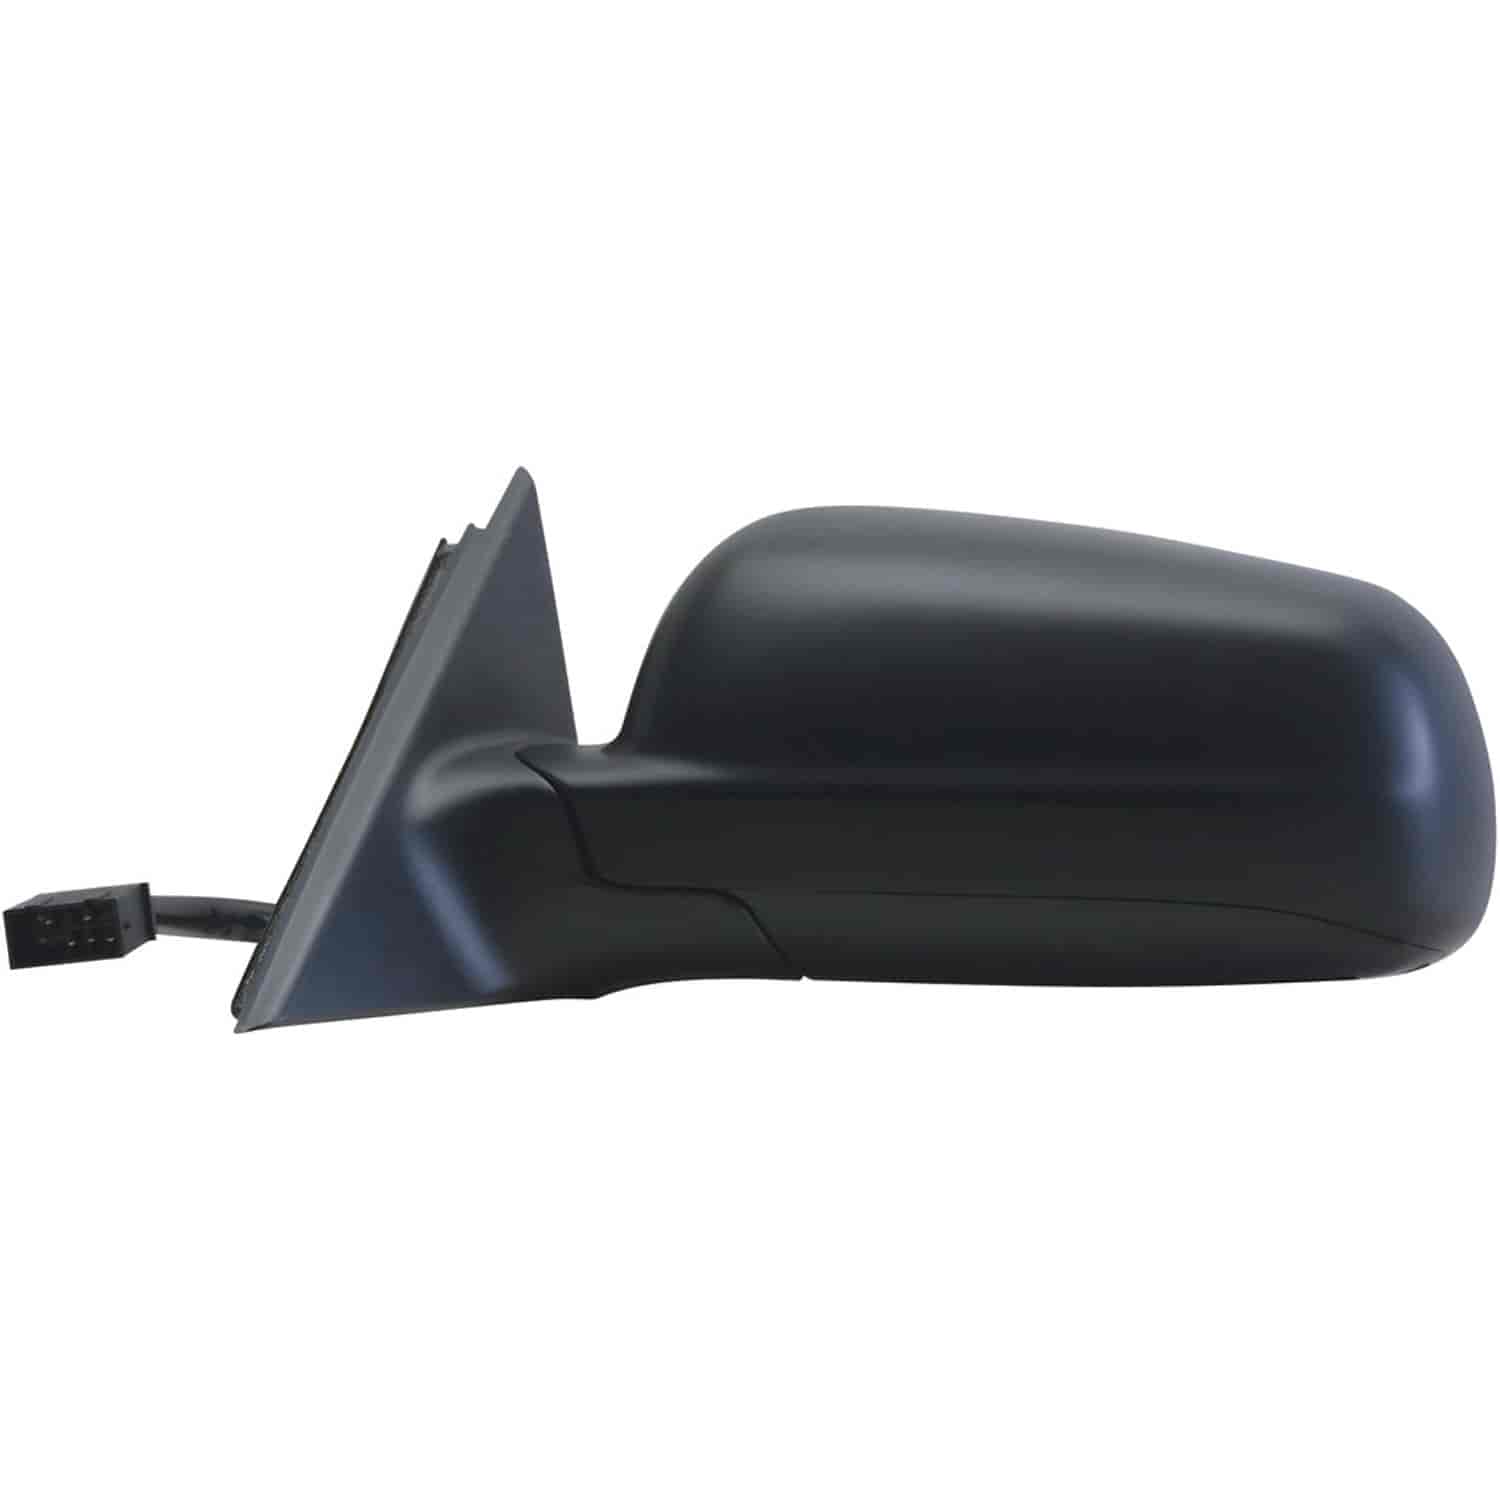 OEM Style Replacement mirror for 98-00 VW Passat driver side mirror tested to fit and function like